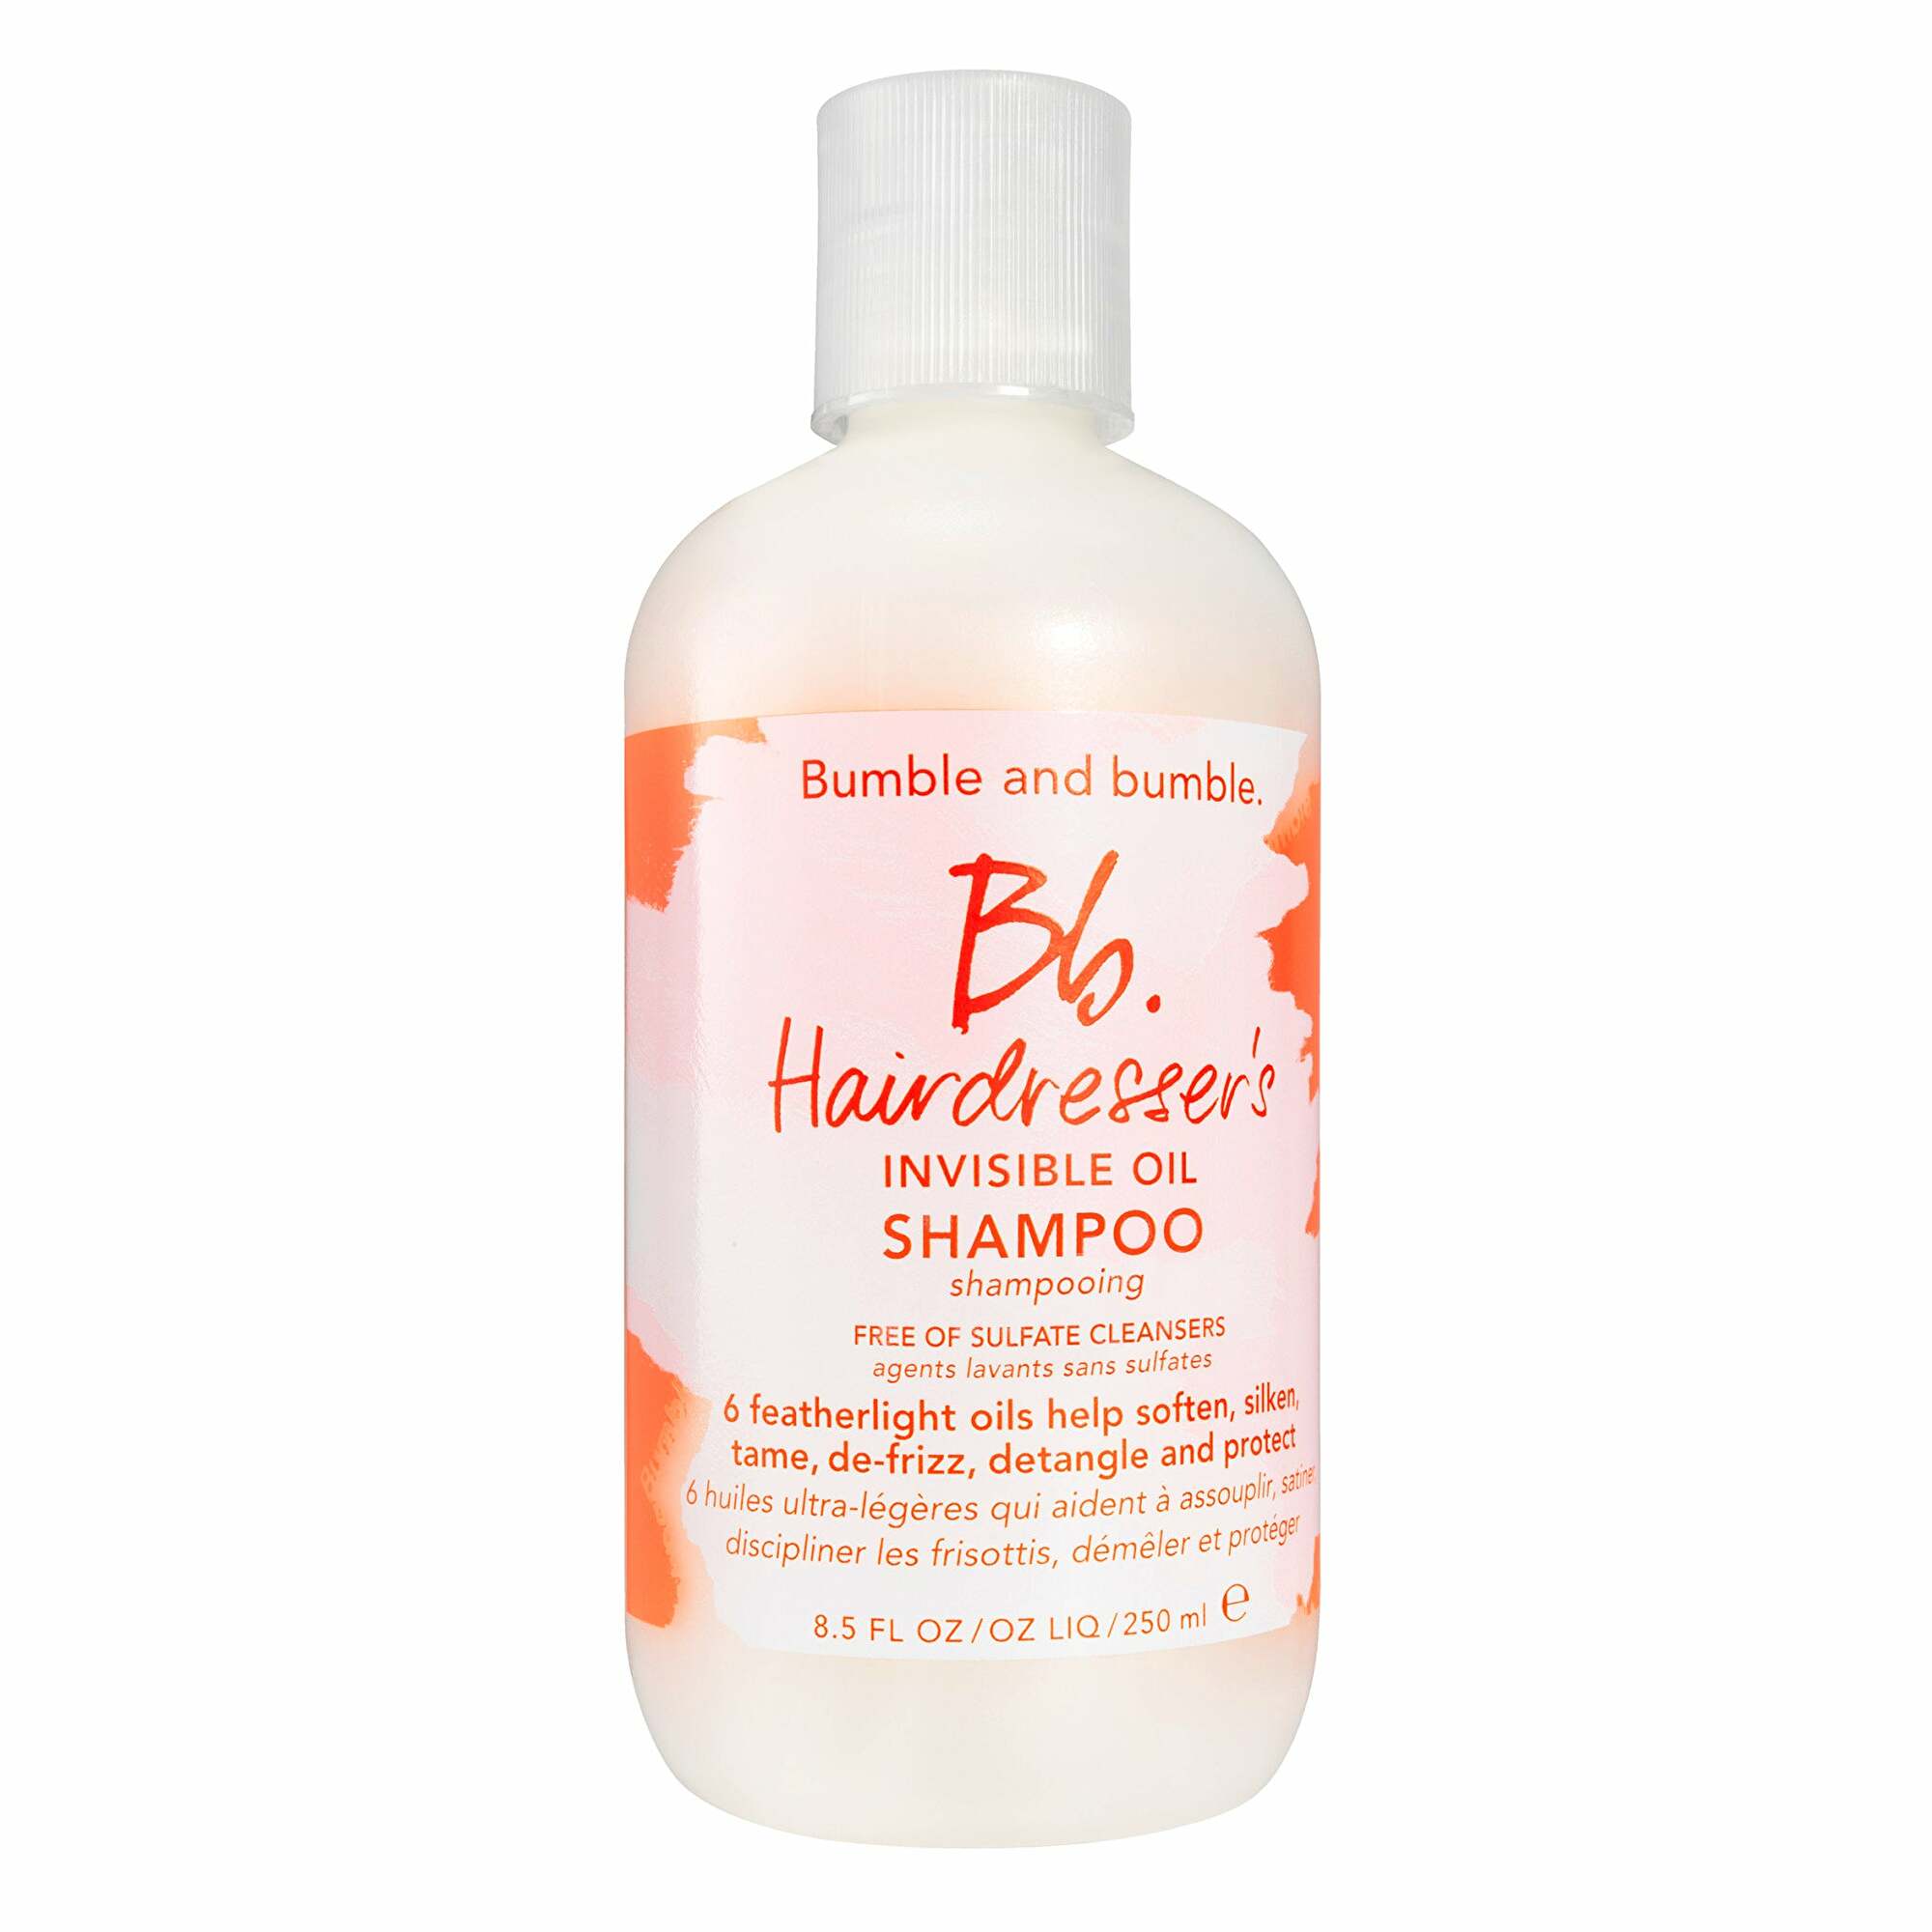 Bumble and bumble HAIRDRESSERS INVISIBLE OIL SHAMPOO 250 ml